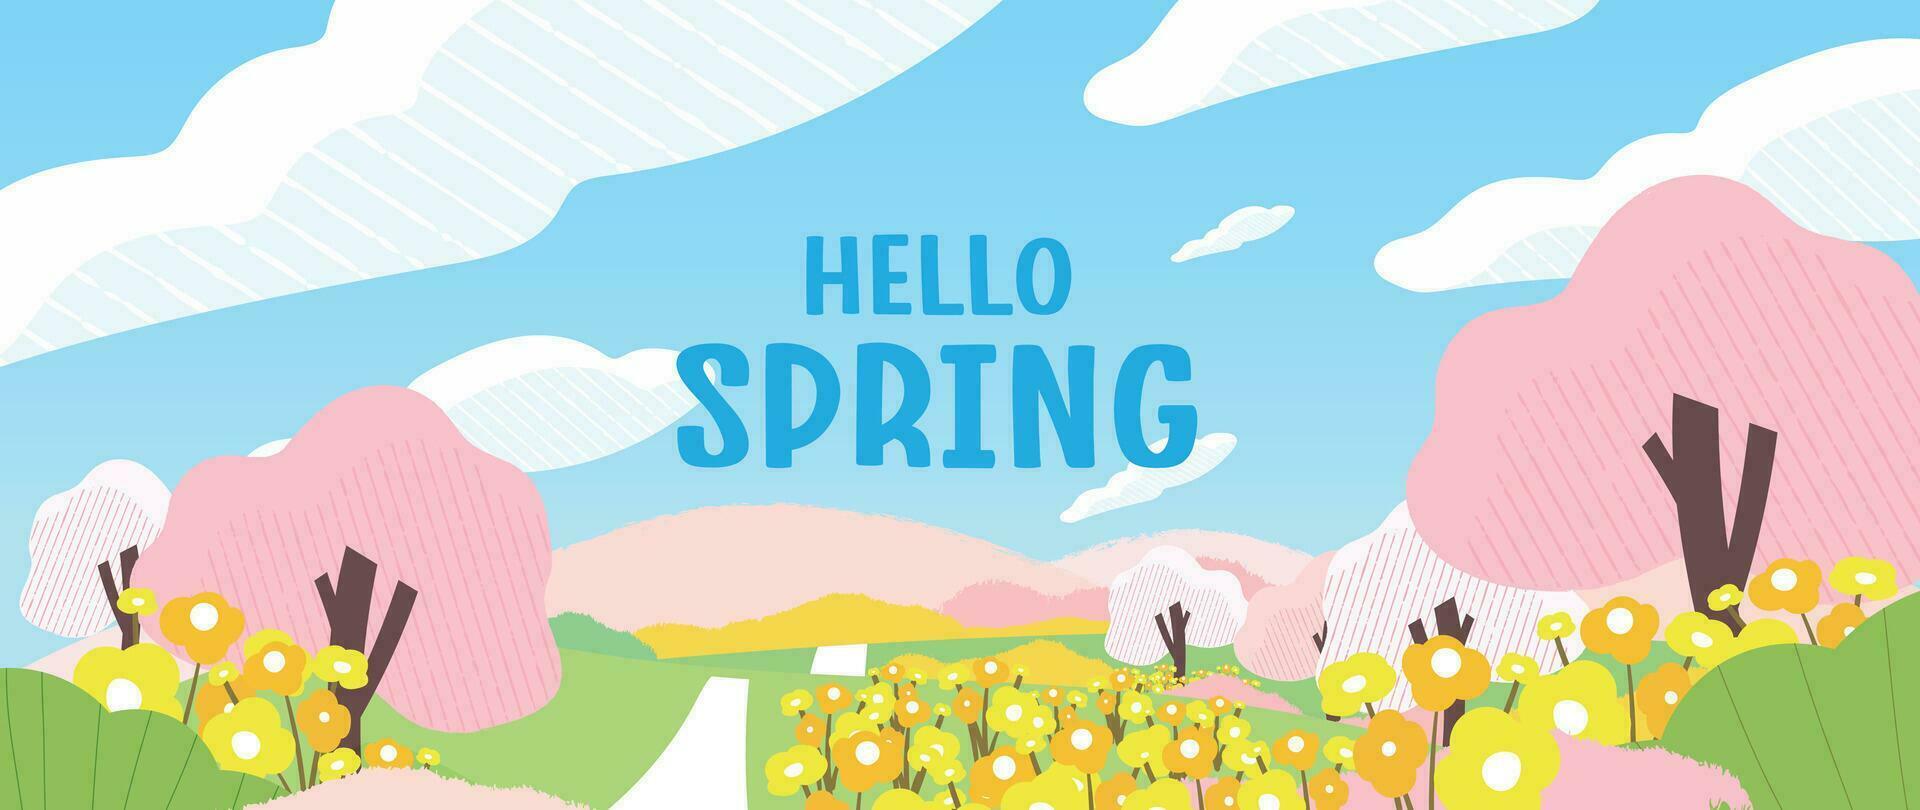 Spring nature and country landscape background. Seasonal illustration vector of trees, flowers, mountain, cloud, sky, grass, field, road. Design for banner, poster, wallpaper, decoration, card.